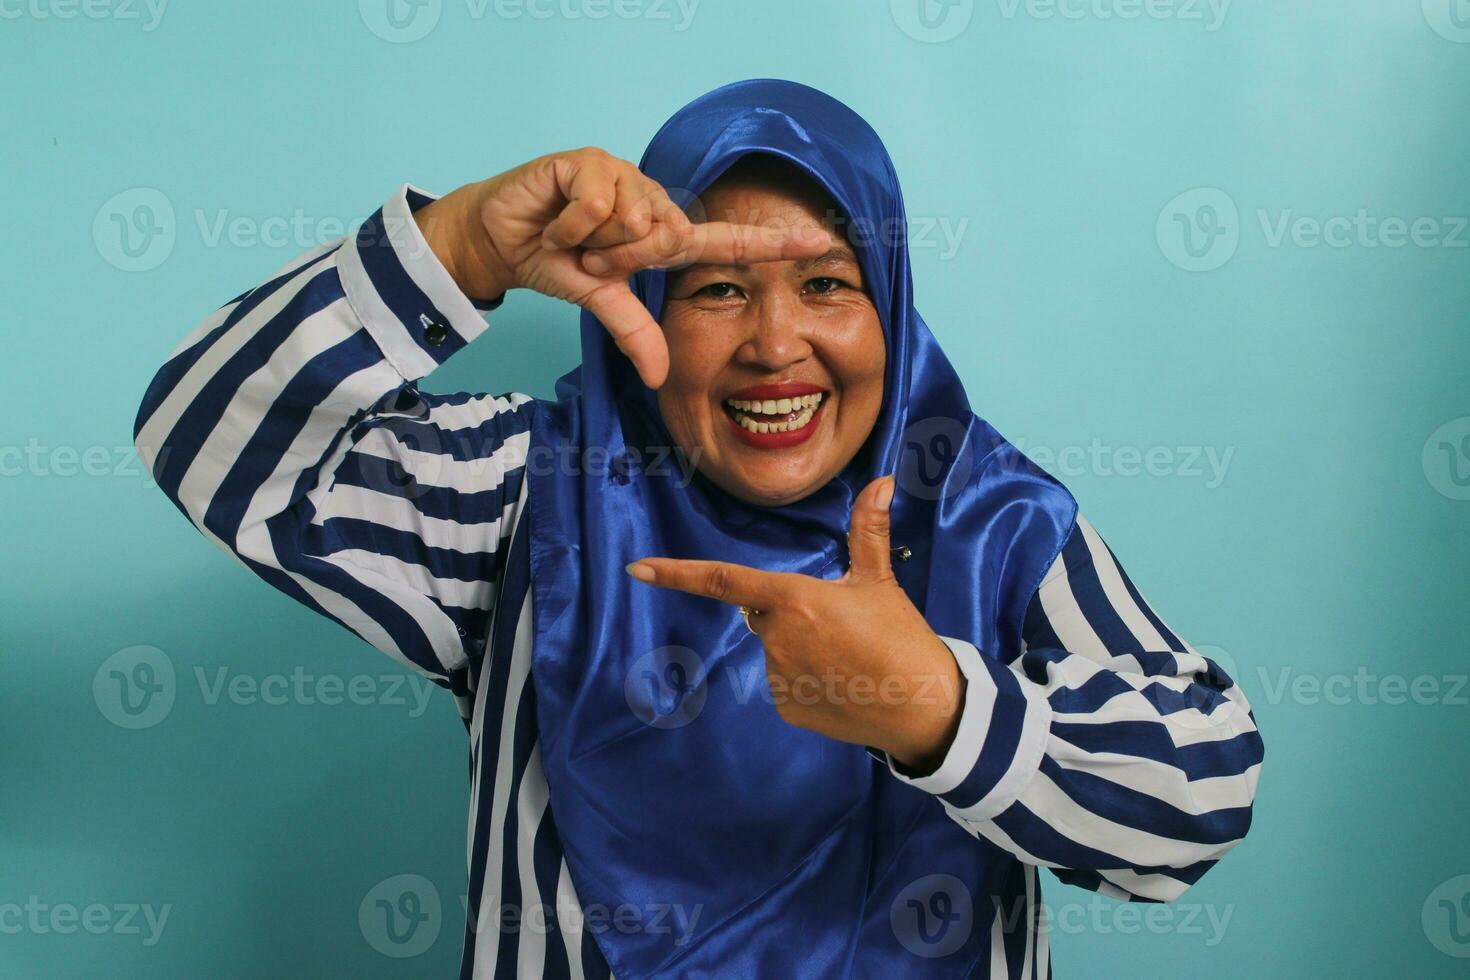 An inspired Middle-Aged Asian woman, in a blue hijab and striped shirt, makes a frame gesture, seeking the perfect angle or inspiration to capture a moment in a photo. Isolated on a blue background photo